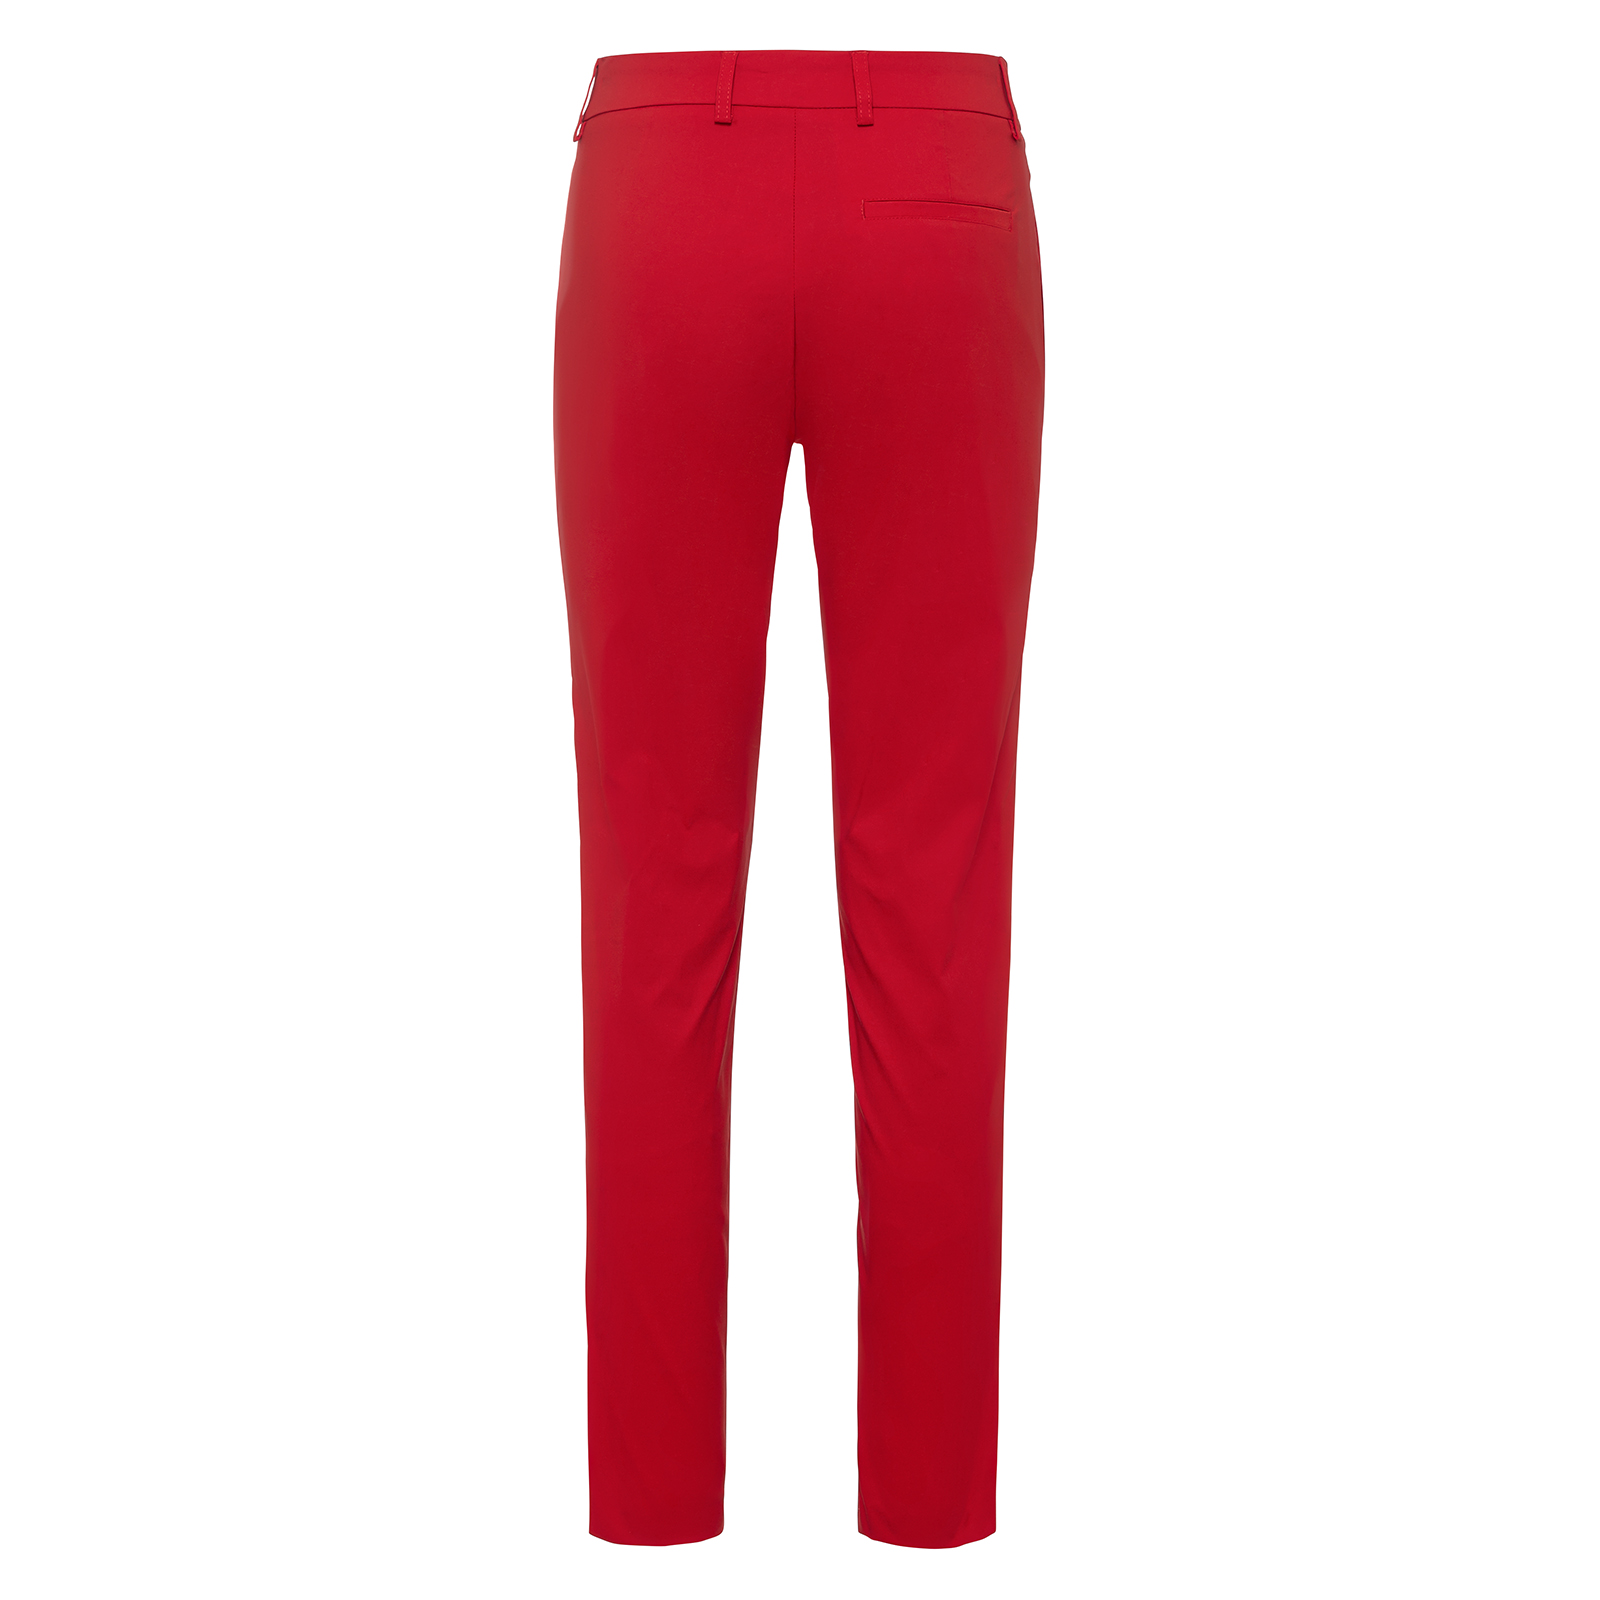 Ladies' 7/8-length stretch trousers